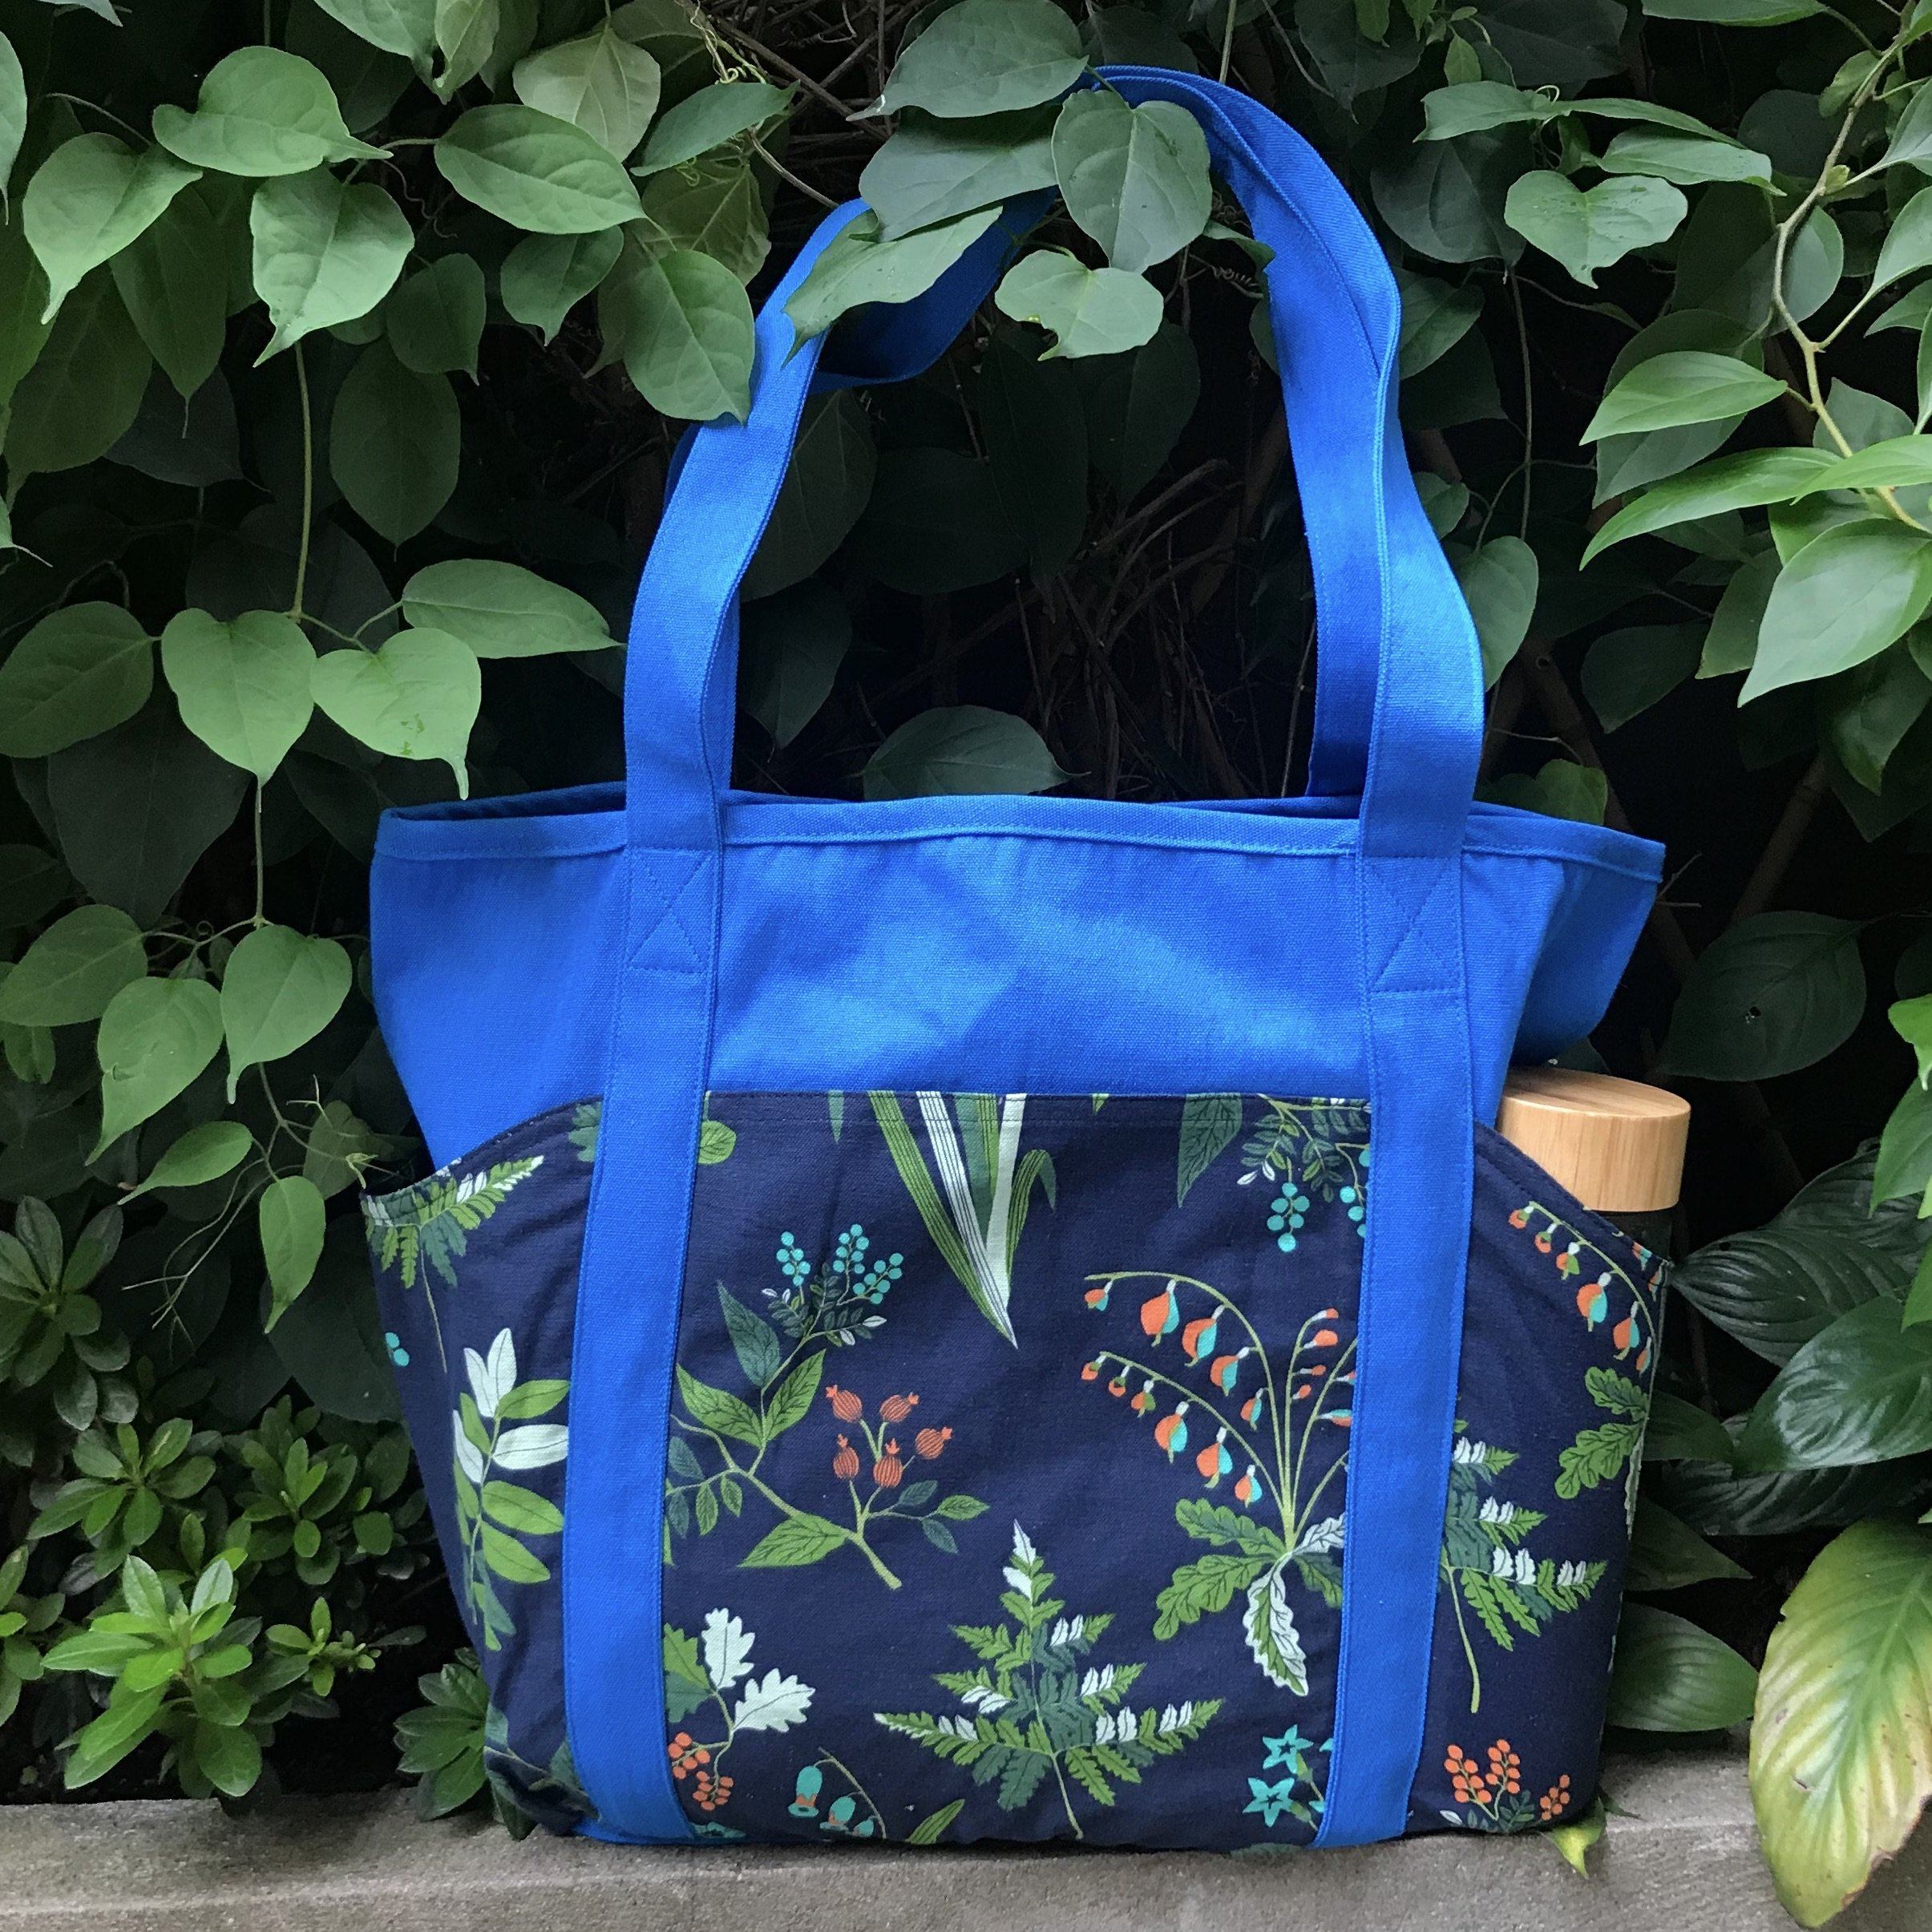 Blue Floral Plant Succulent Print Cotton Weekend :Tote Bag with Pockets